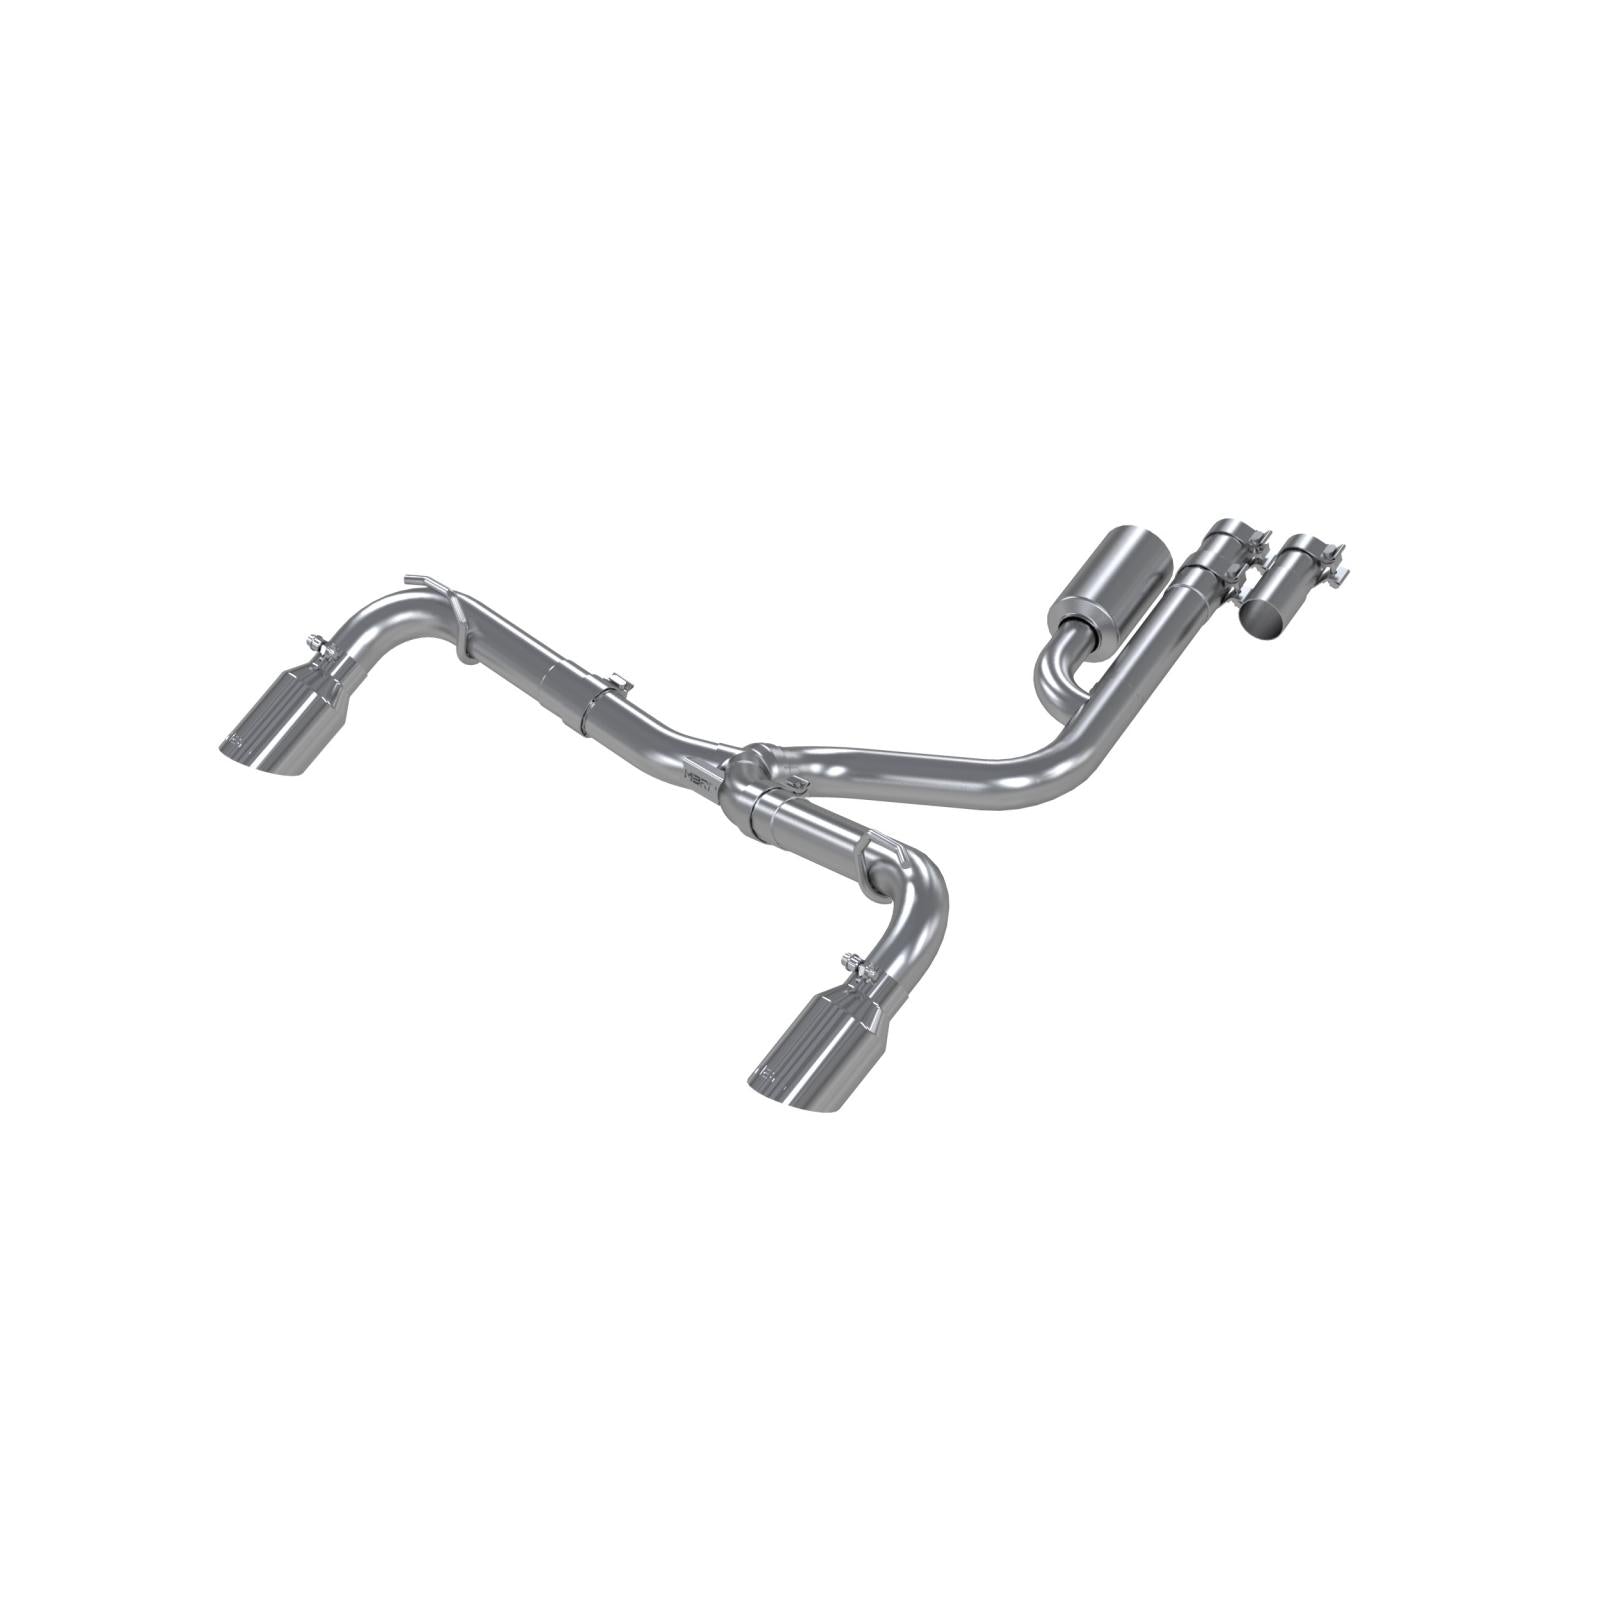 MBRP Exhaust 2021-Up Ford Bronco Sport 1.5L/ 2.0L EcoBoost T409 Stainless Steel 2.5 Inch Resonator-Back Dual Split Rear Exit MBRP Exhaust System S5207409